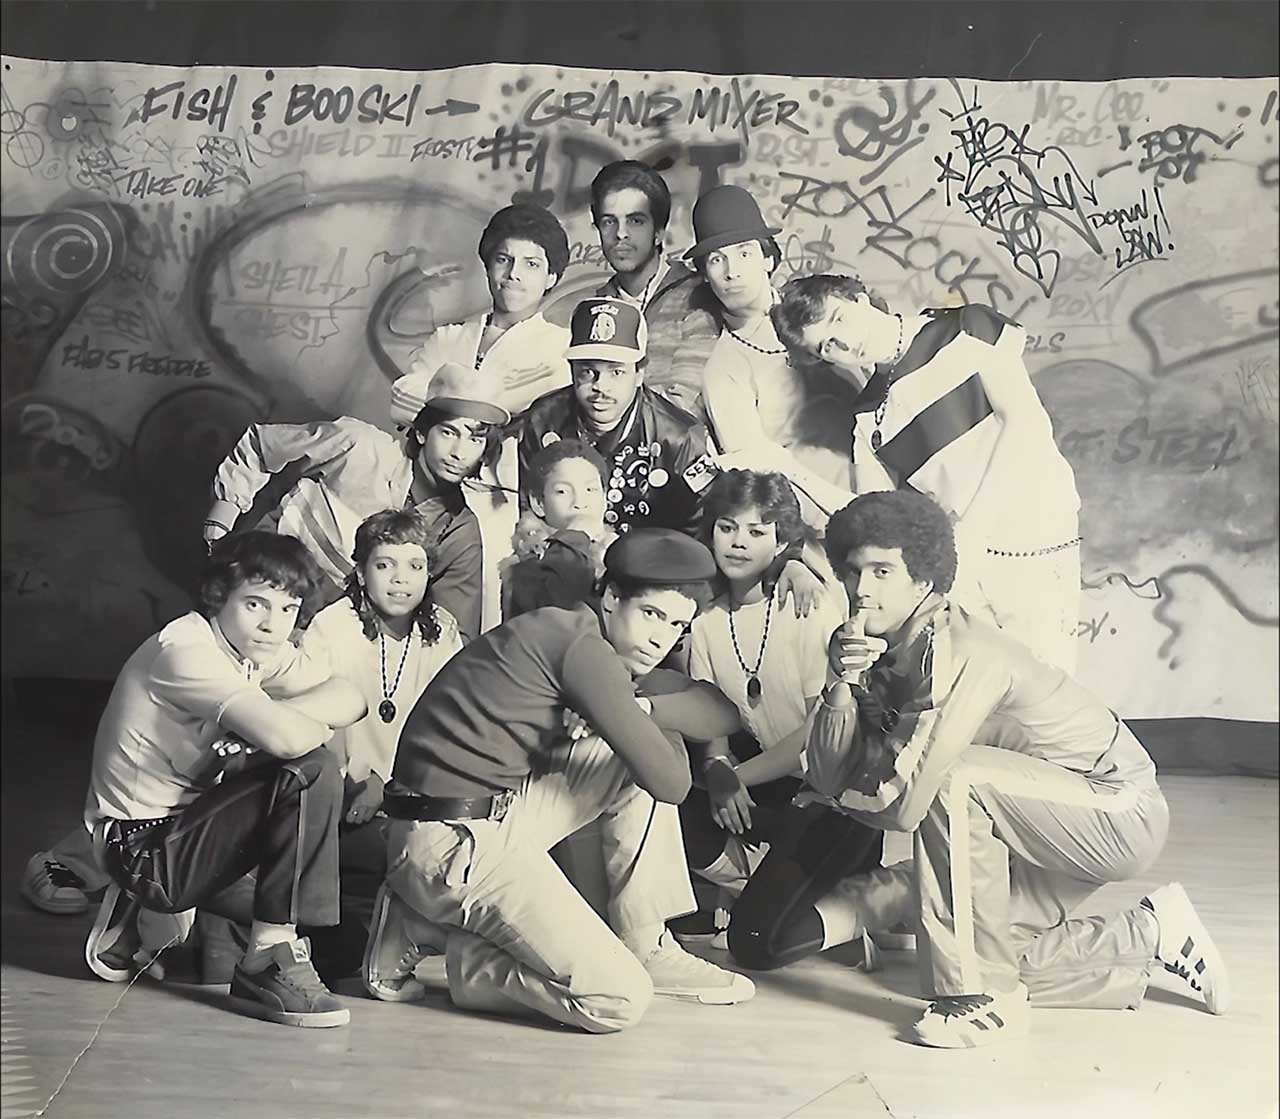 Black and white photo of 12 1980s breakdancers posing in front of a wall with graffiti.